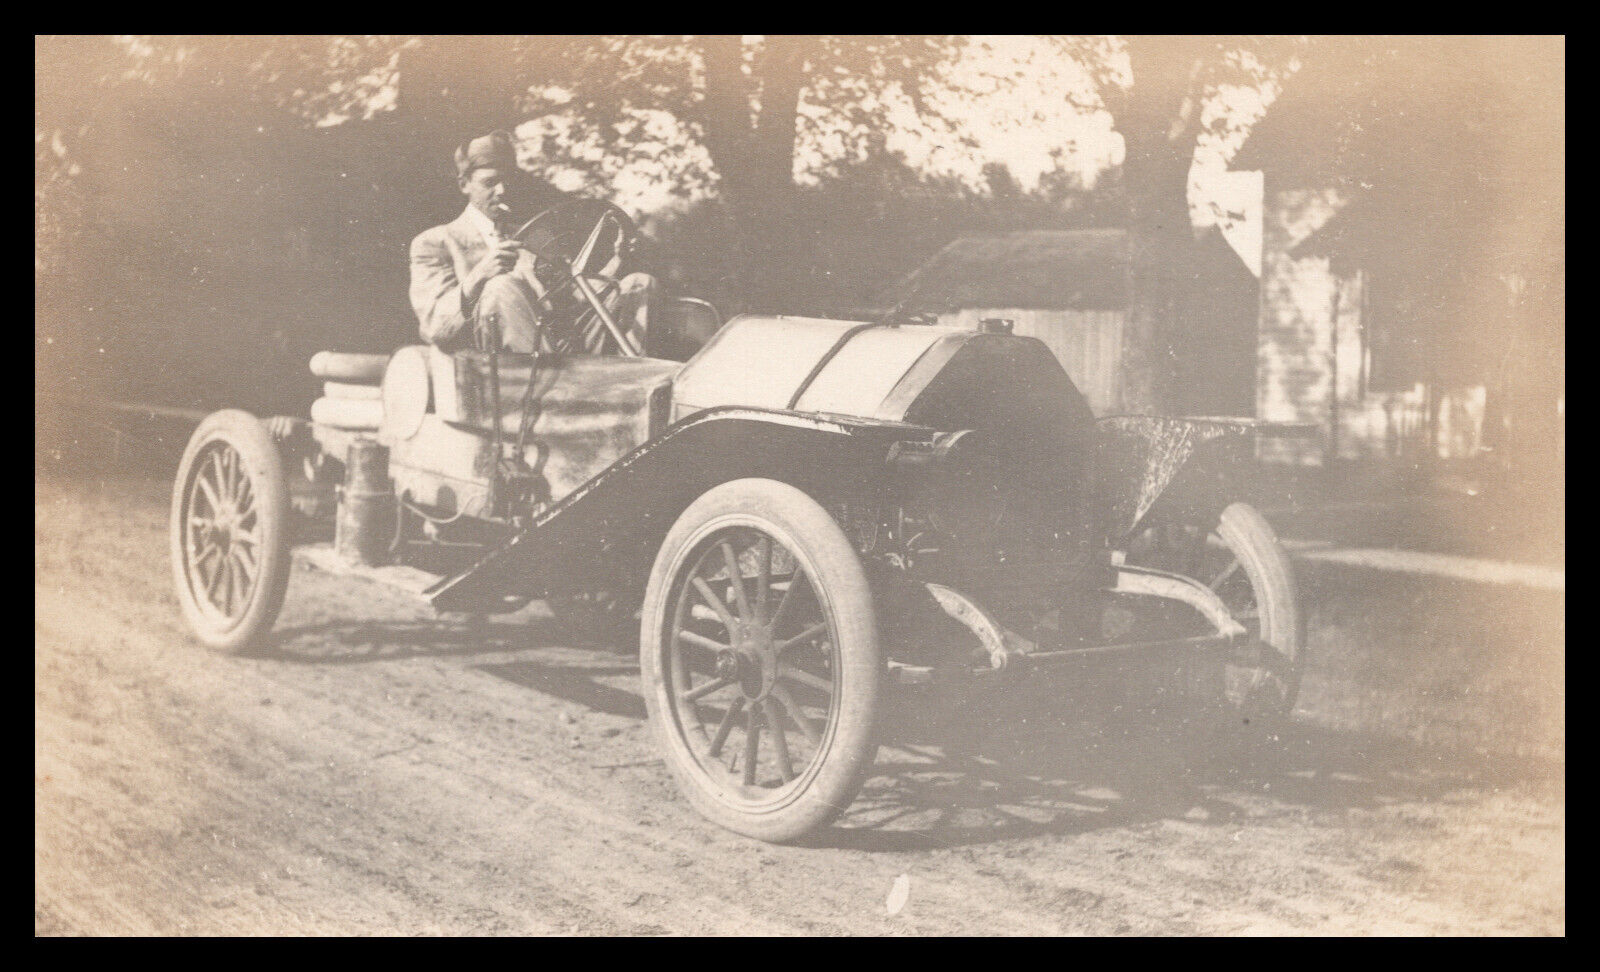 Antique Auto, Gearbox on Right - OUTSIDE of the CAR Real Photo Postcard, RPPC